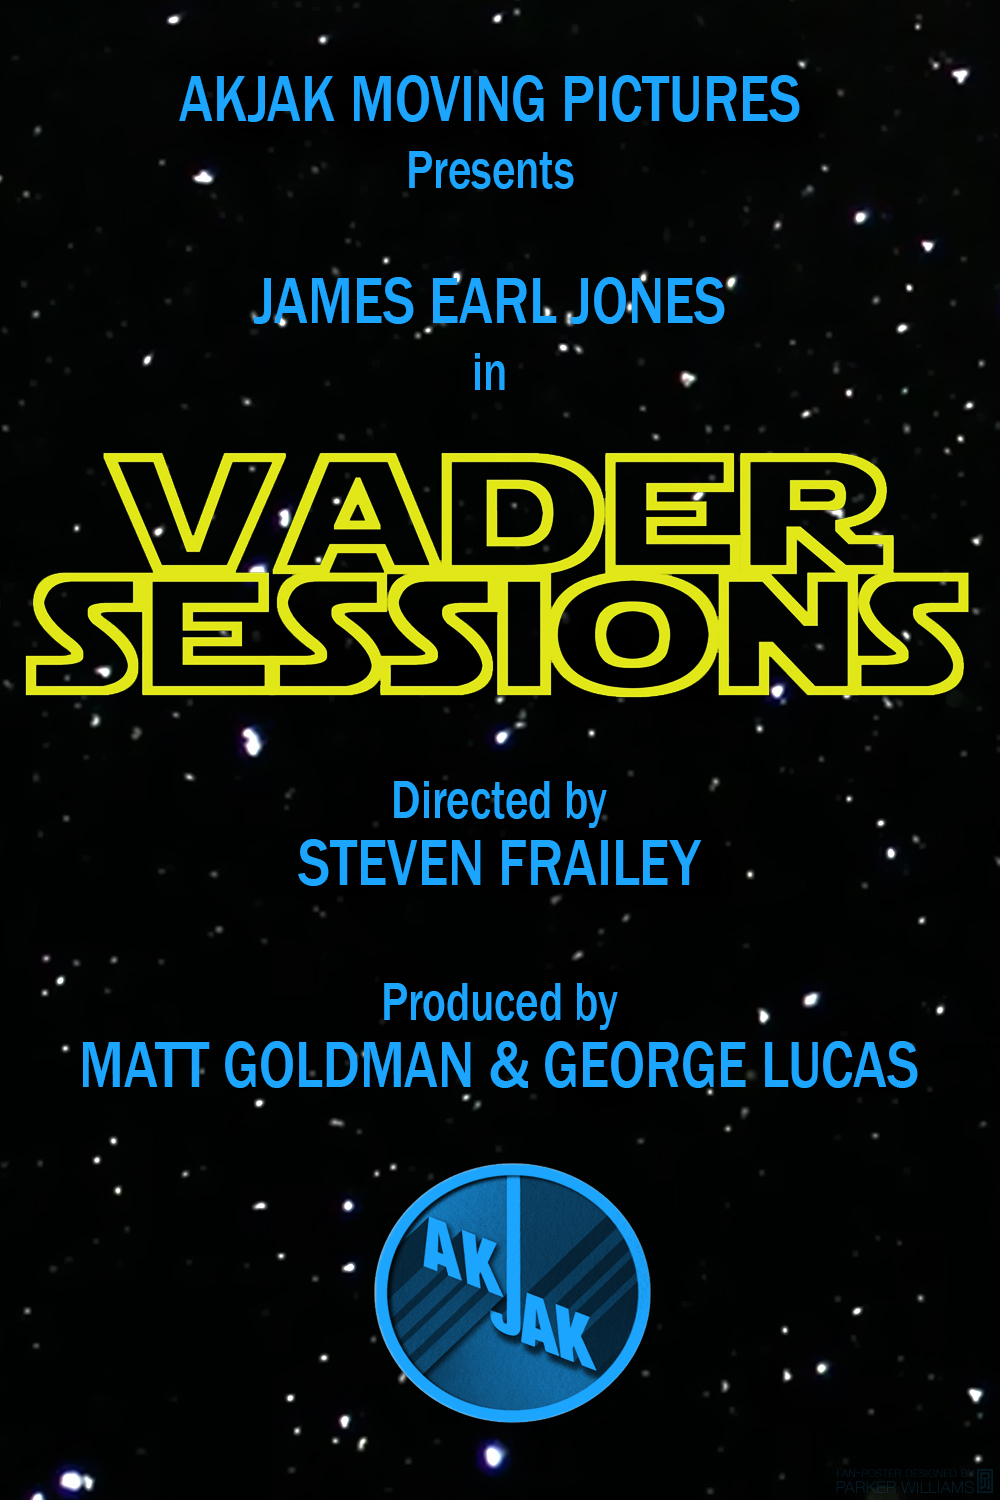 Vader Sessions